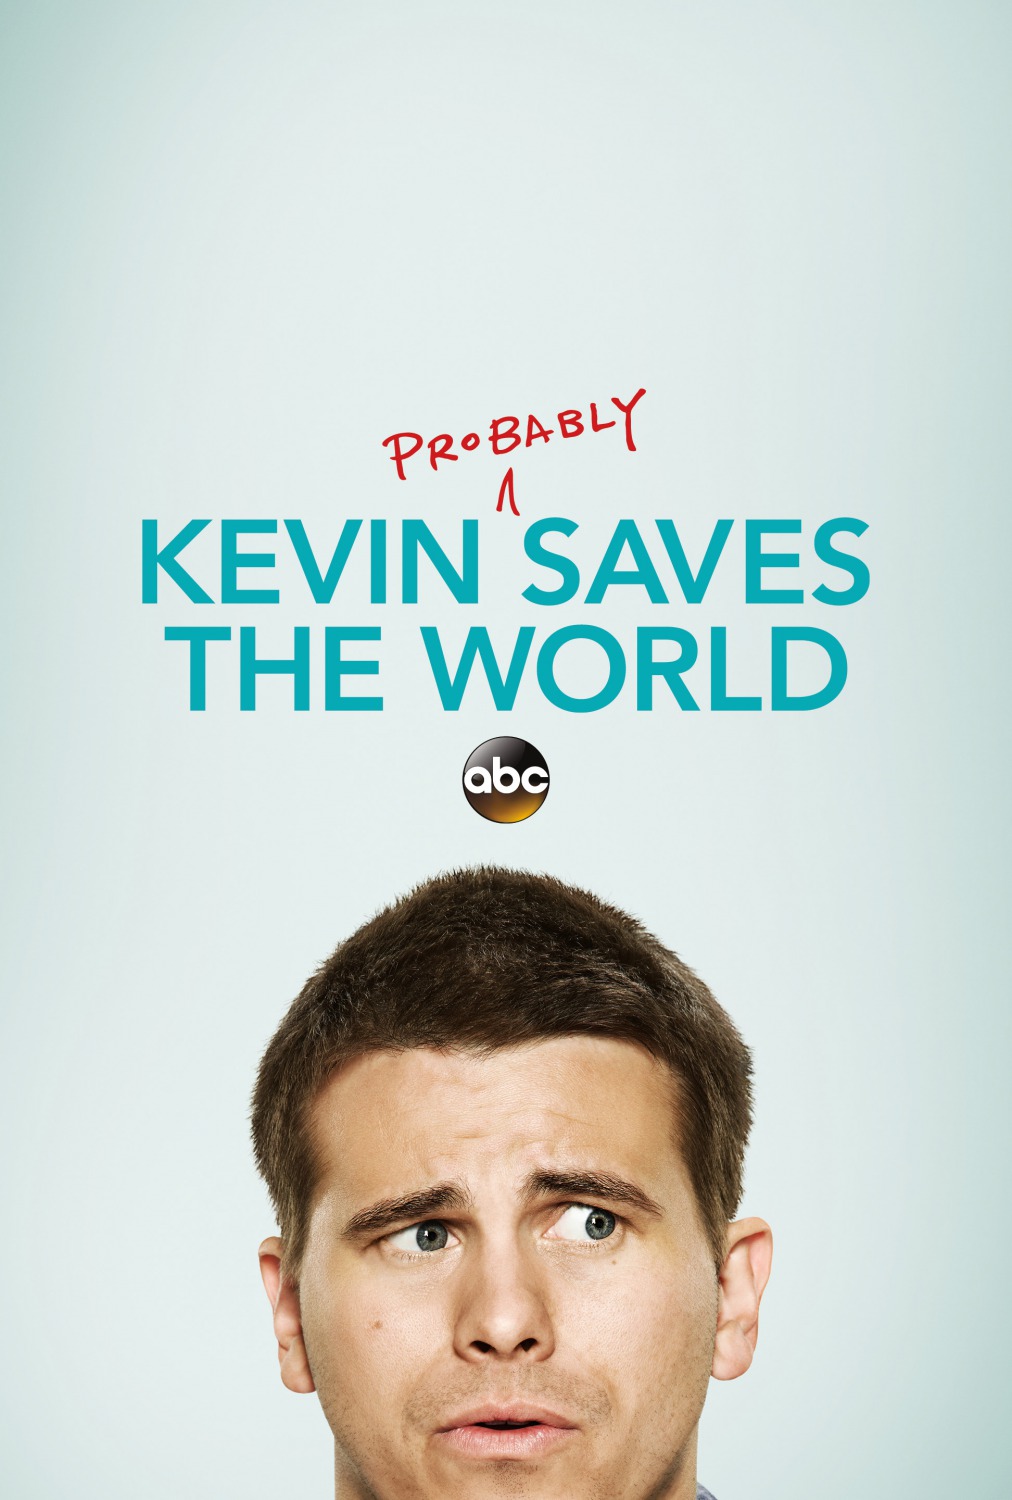 Extra Large Movie Poster Image for Kevin (Probably) Saves the World 